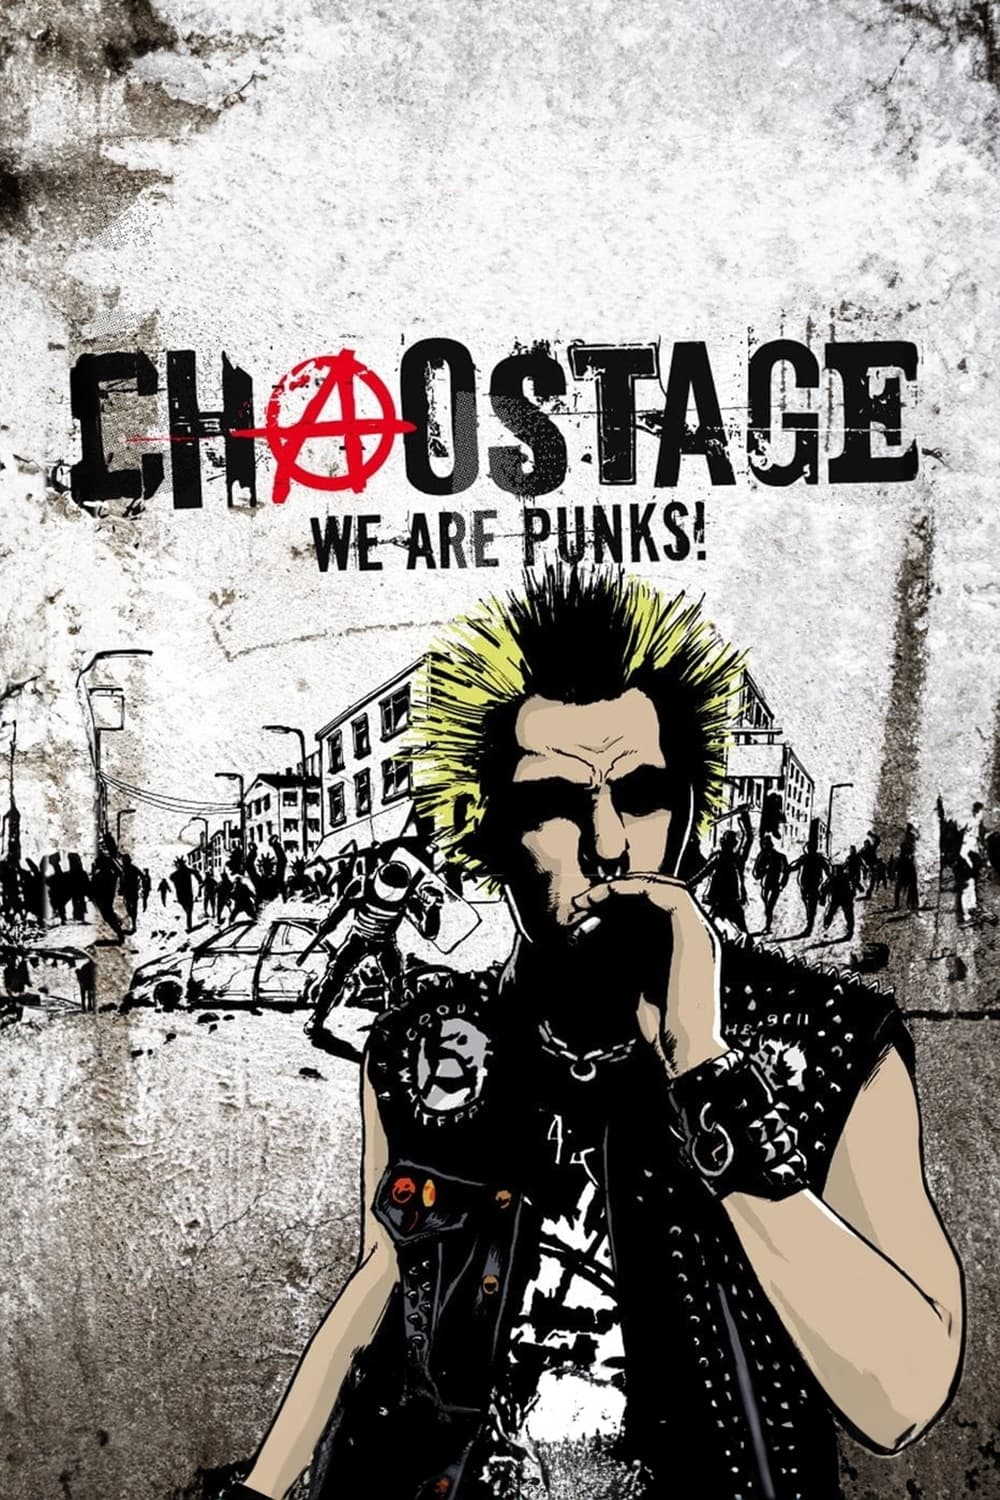 Chaostage - We Are Punks! (2009)